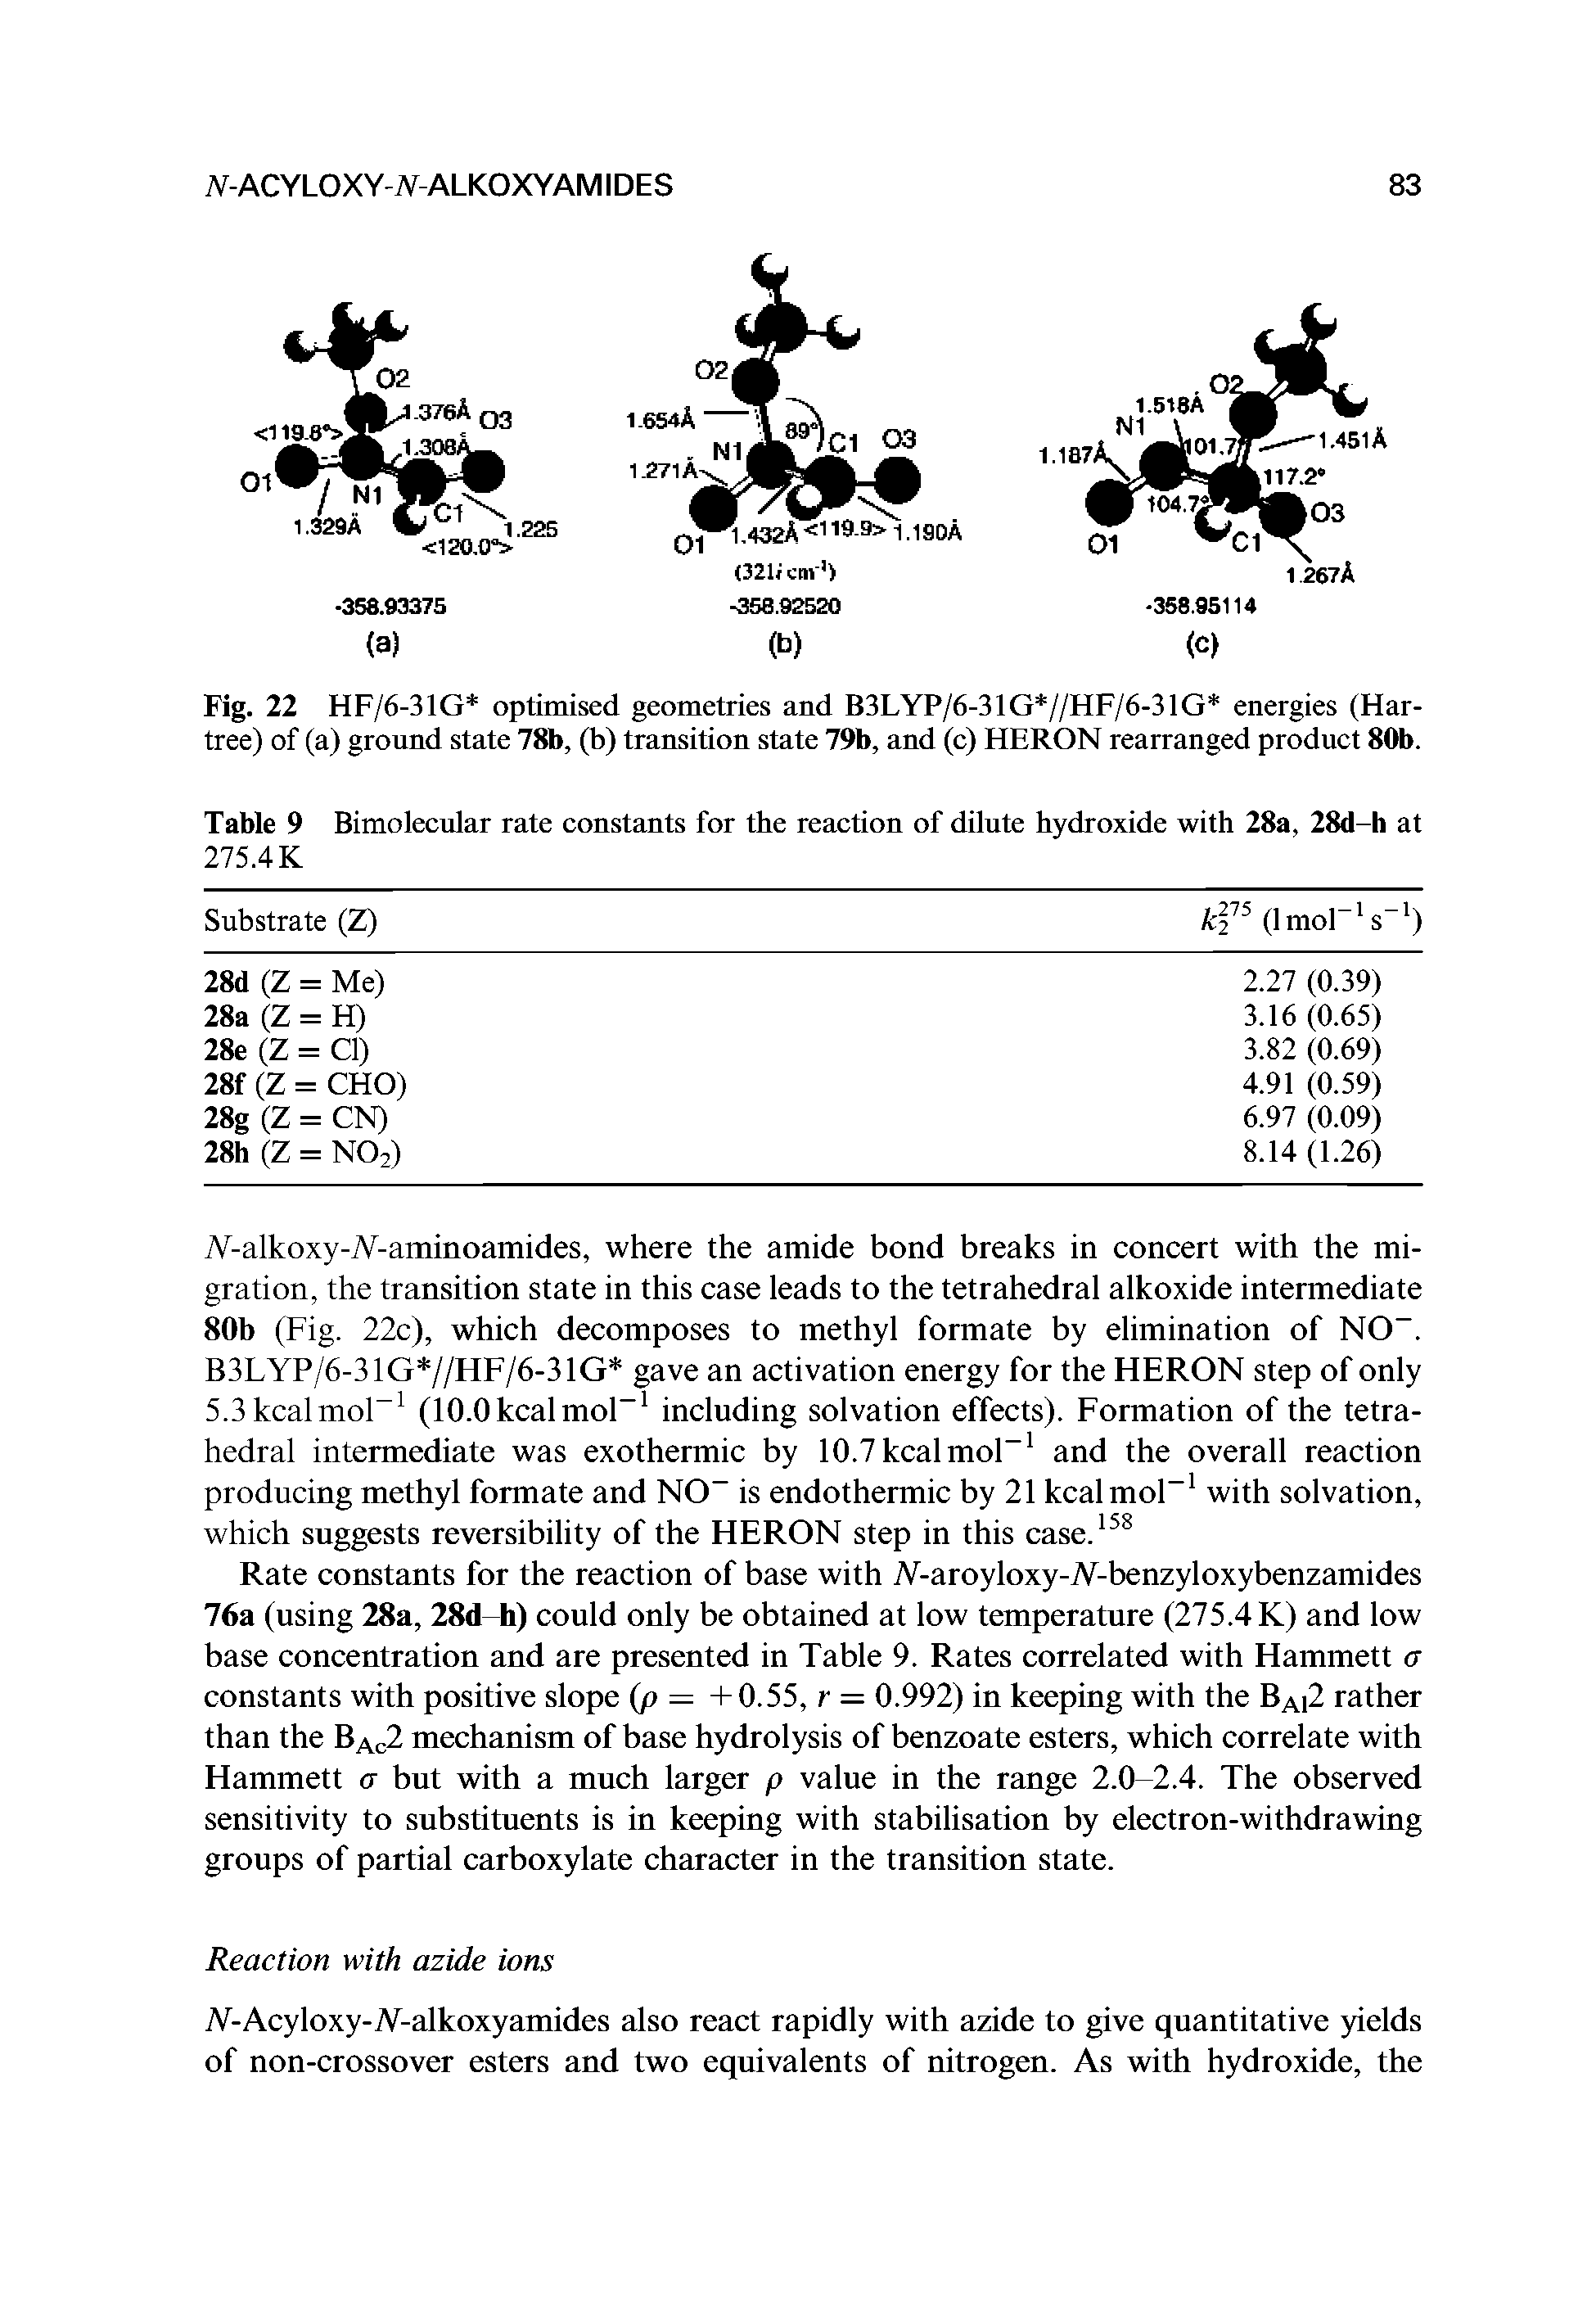 Fig. 22 HF/6-31G optimised geometries and B3LYP/6-31G //HF/6-31G energies (Har-tree) of (a) ground state 78b, (b) transition state 79b, and (c) HERON rearranged product 80b.